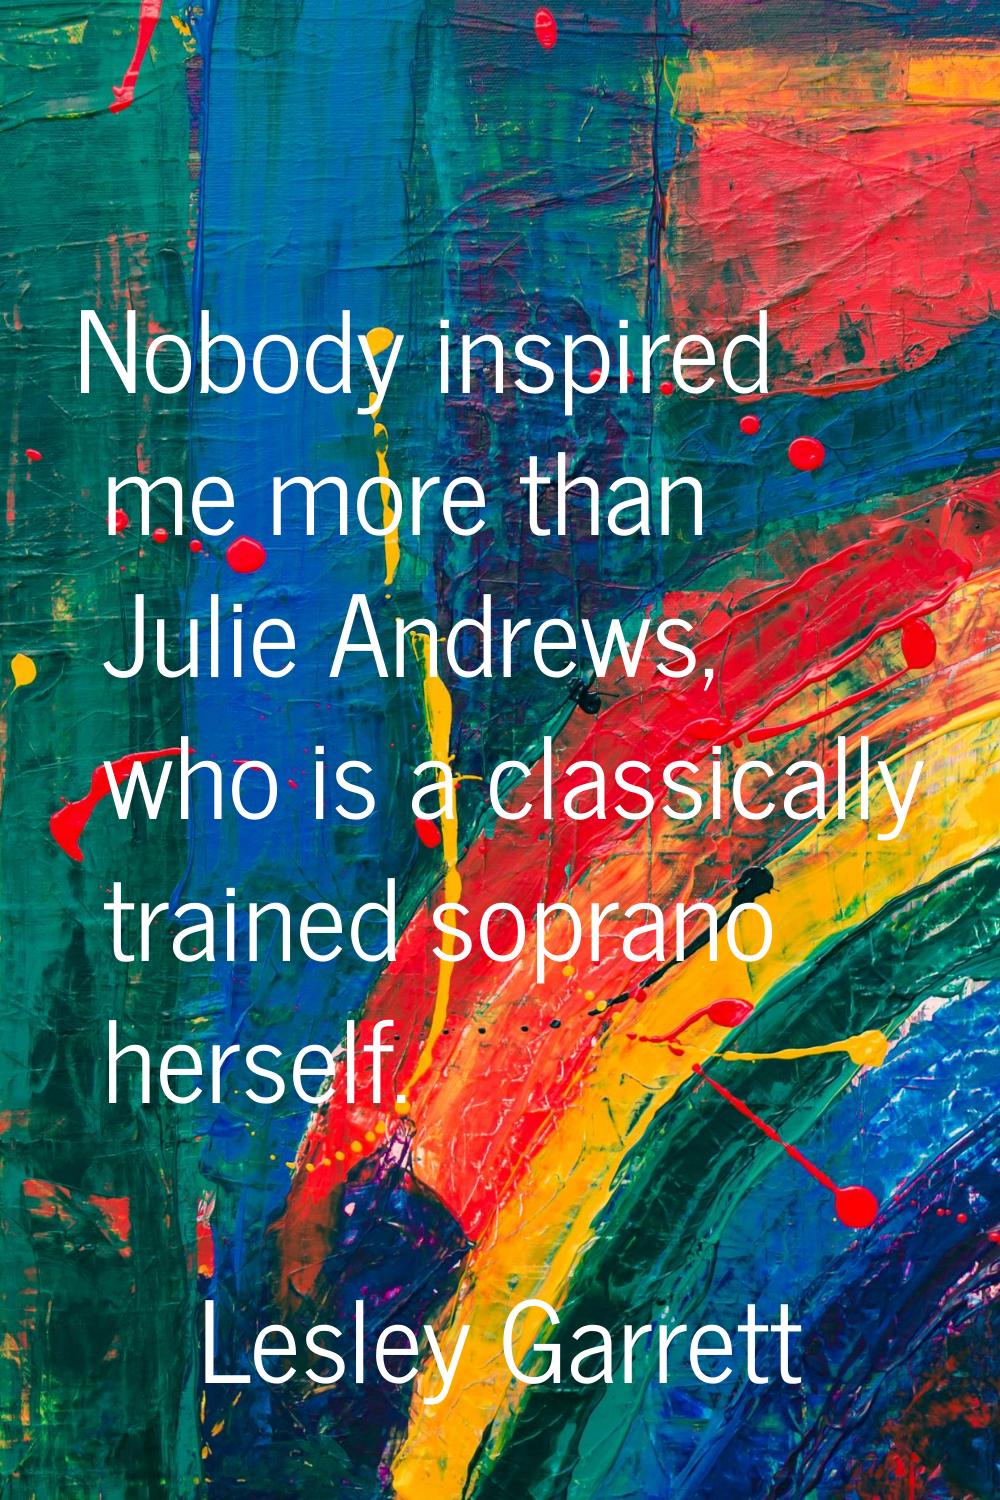 Nobody inspired me more than Julie Andrews, who is a classically trained soprano herself.